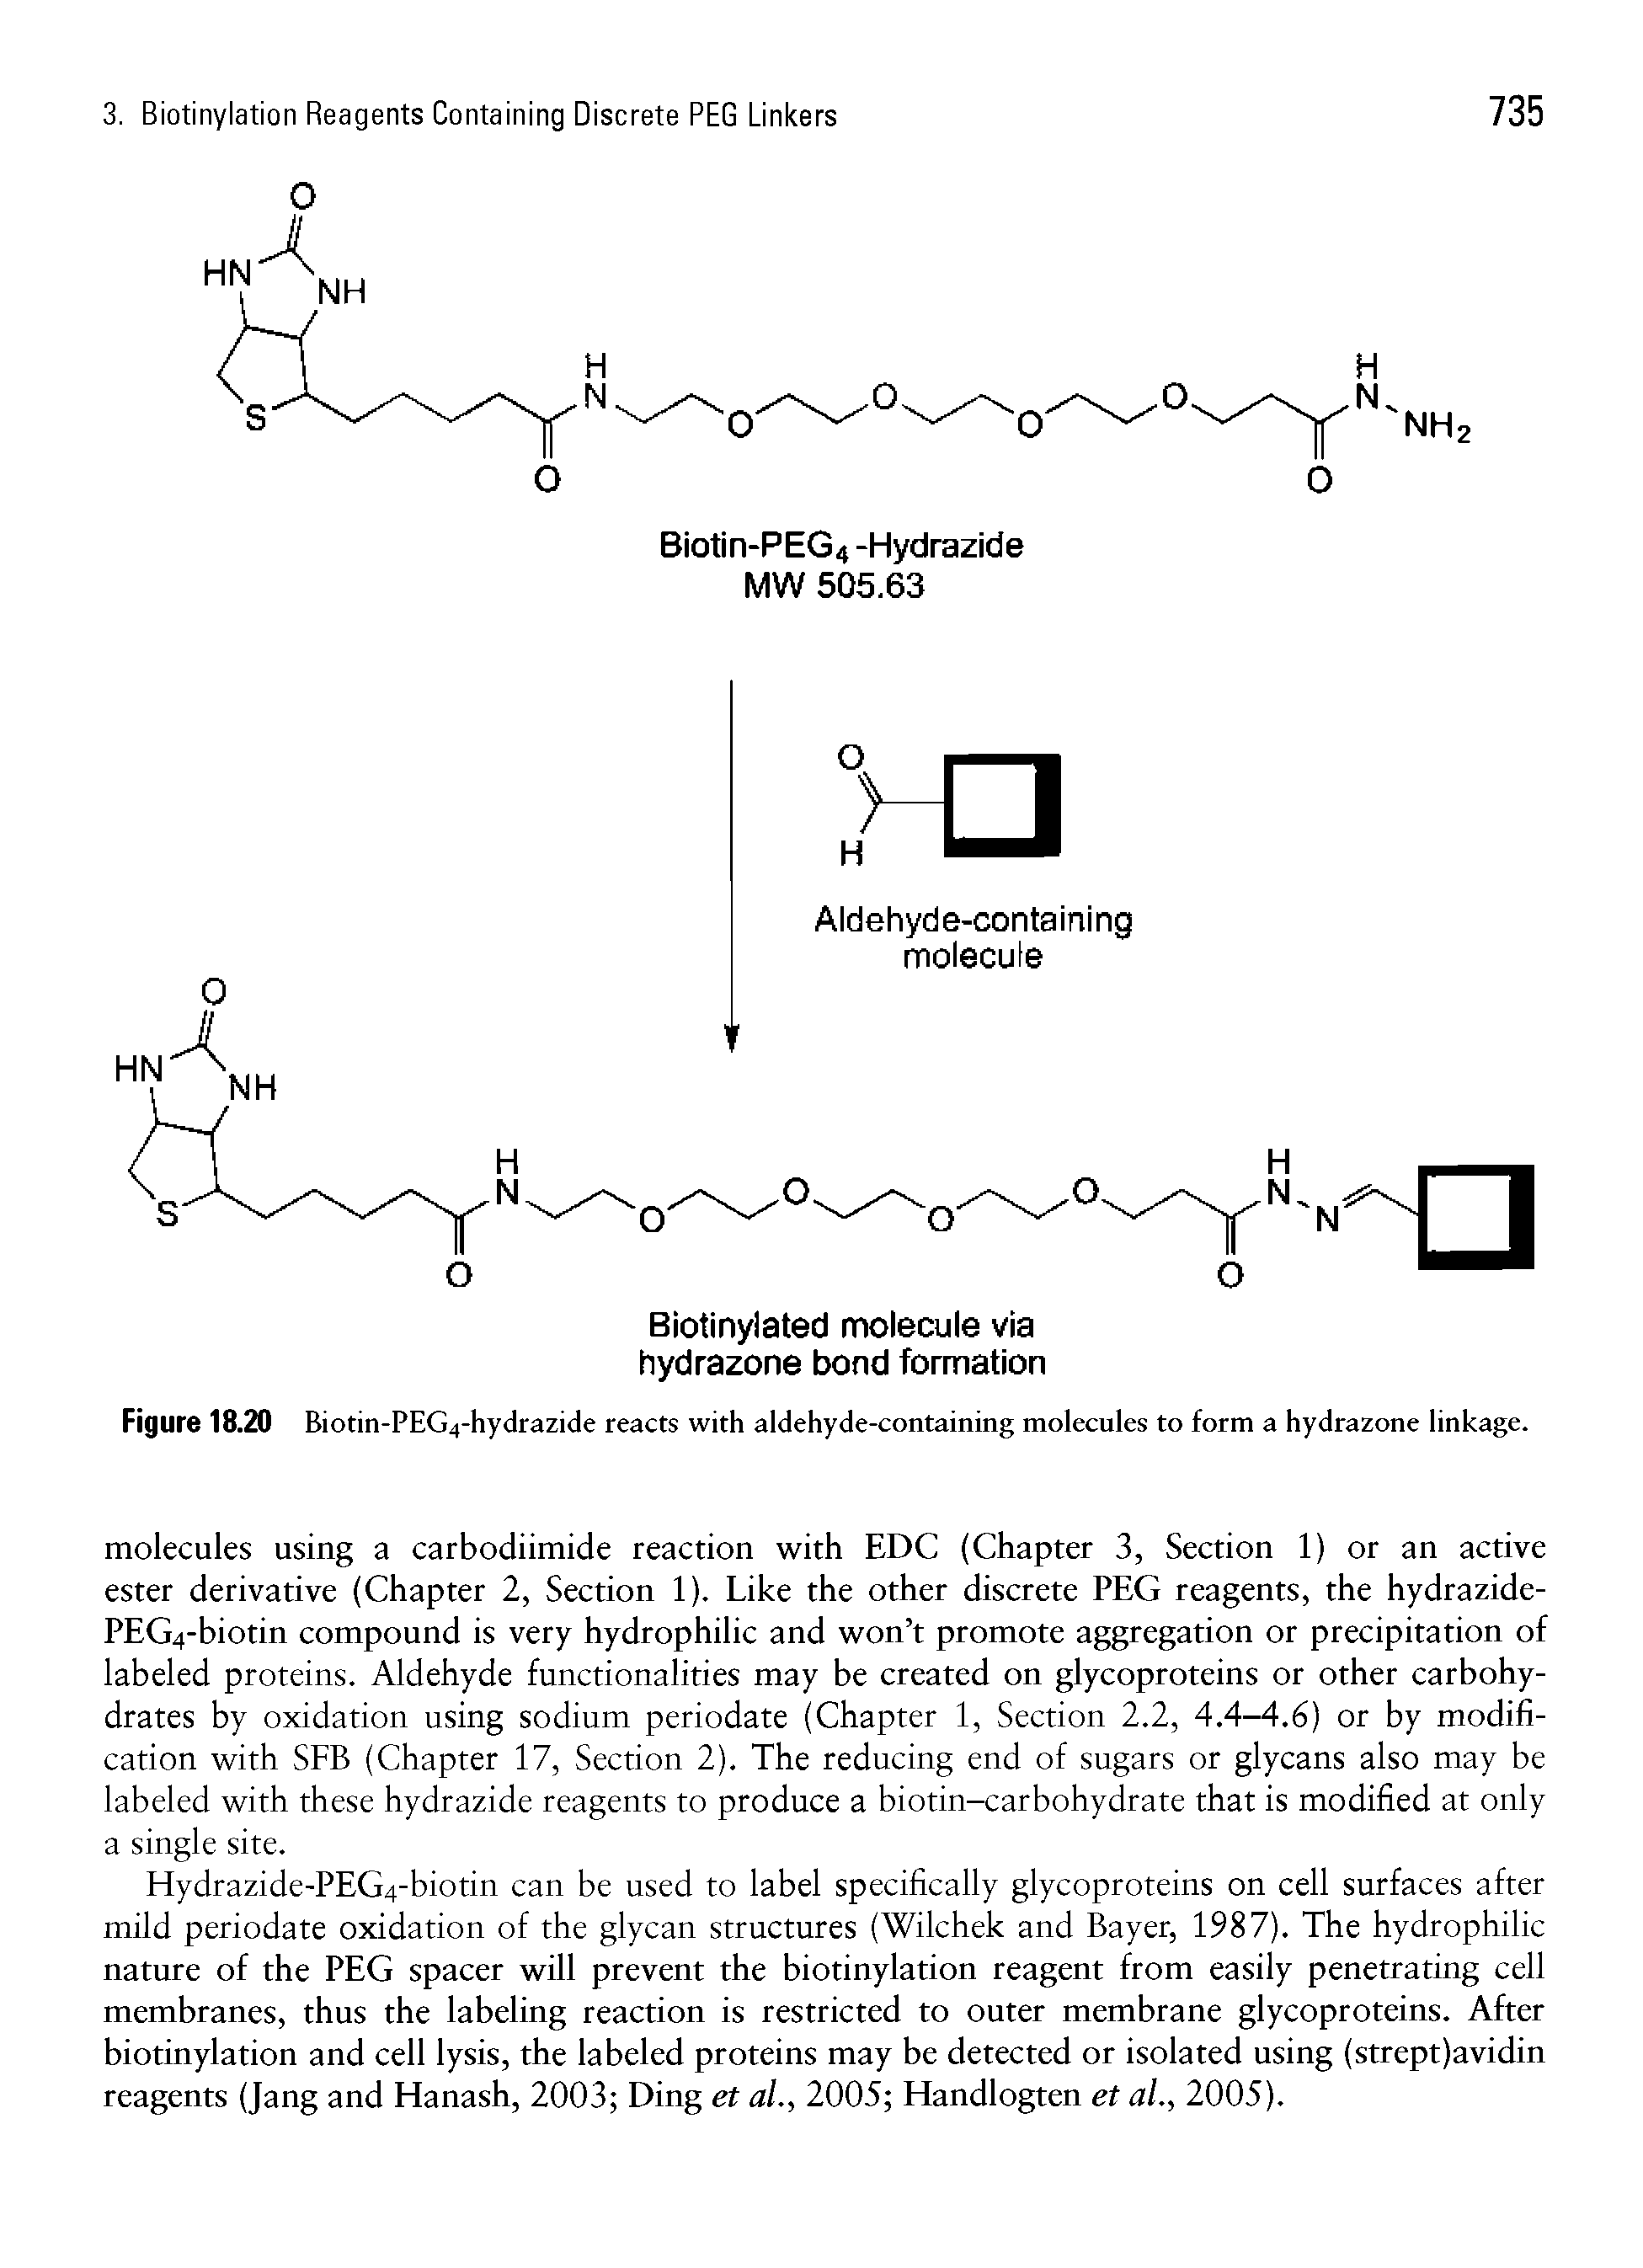 Figure 18.20 Biotin-PEG4-hydrazide reacts with aldehyde-containing molecules to form a hydrazone linkage.